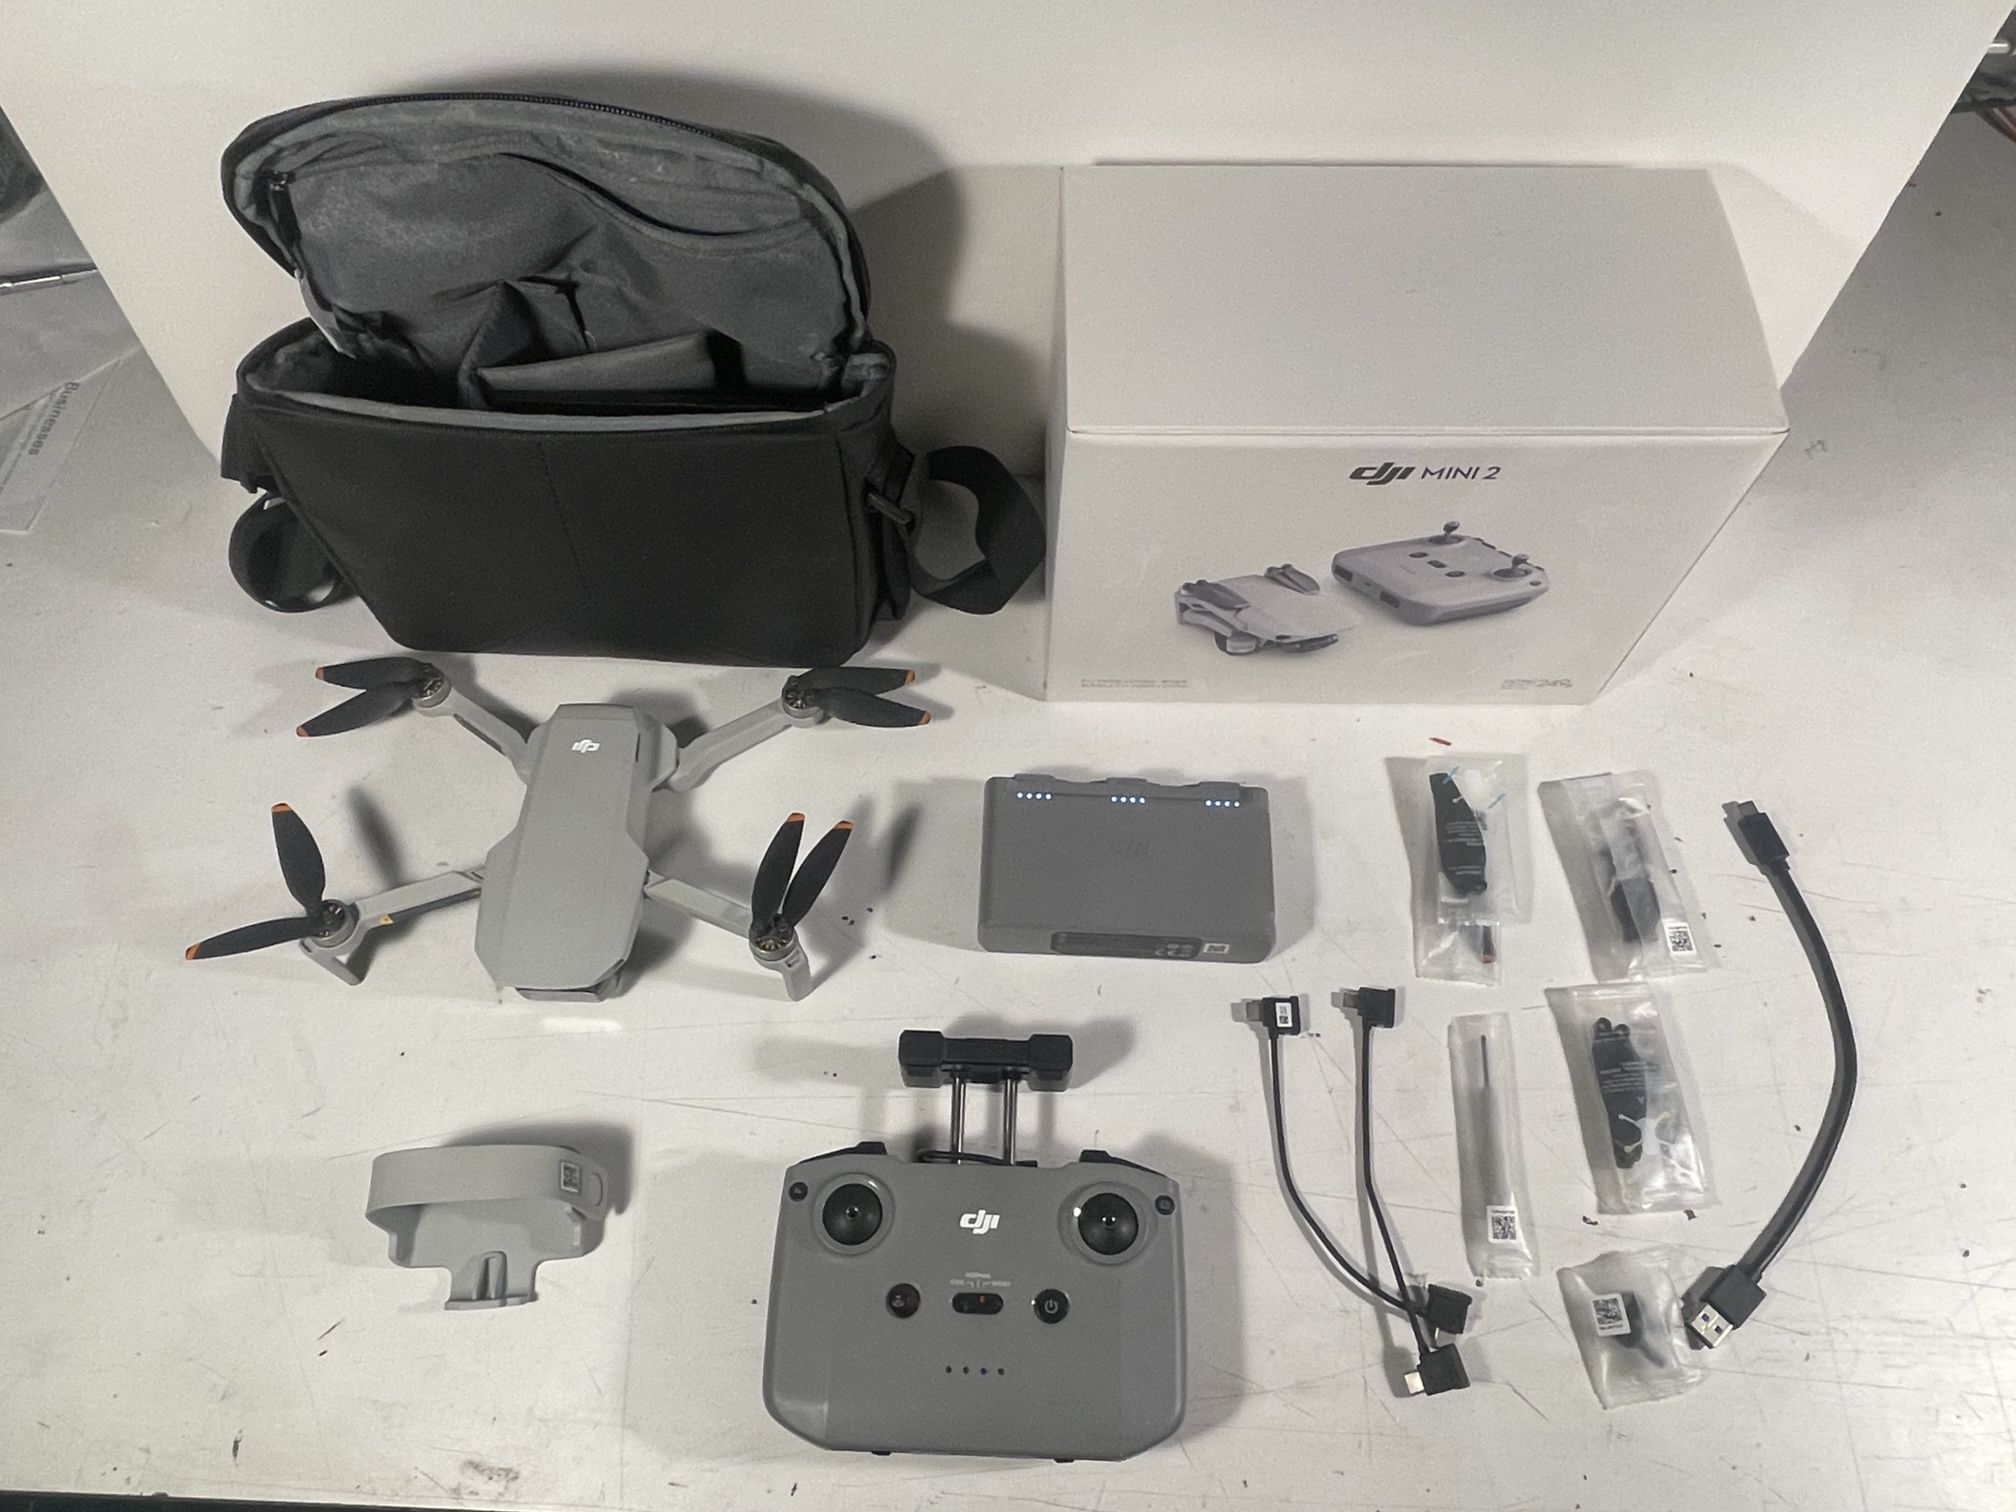 DJI Mini 2 Ultralight Fly More Drone, Barely Used